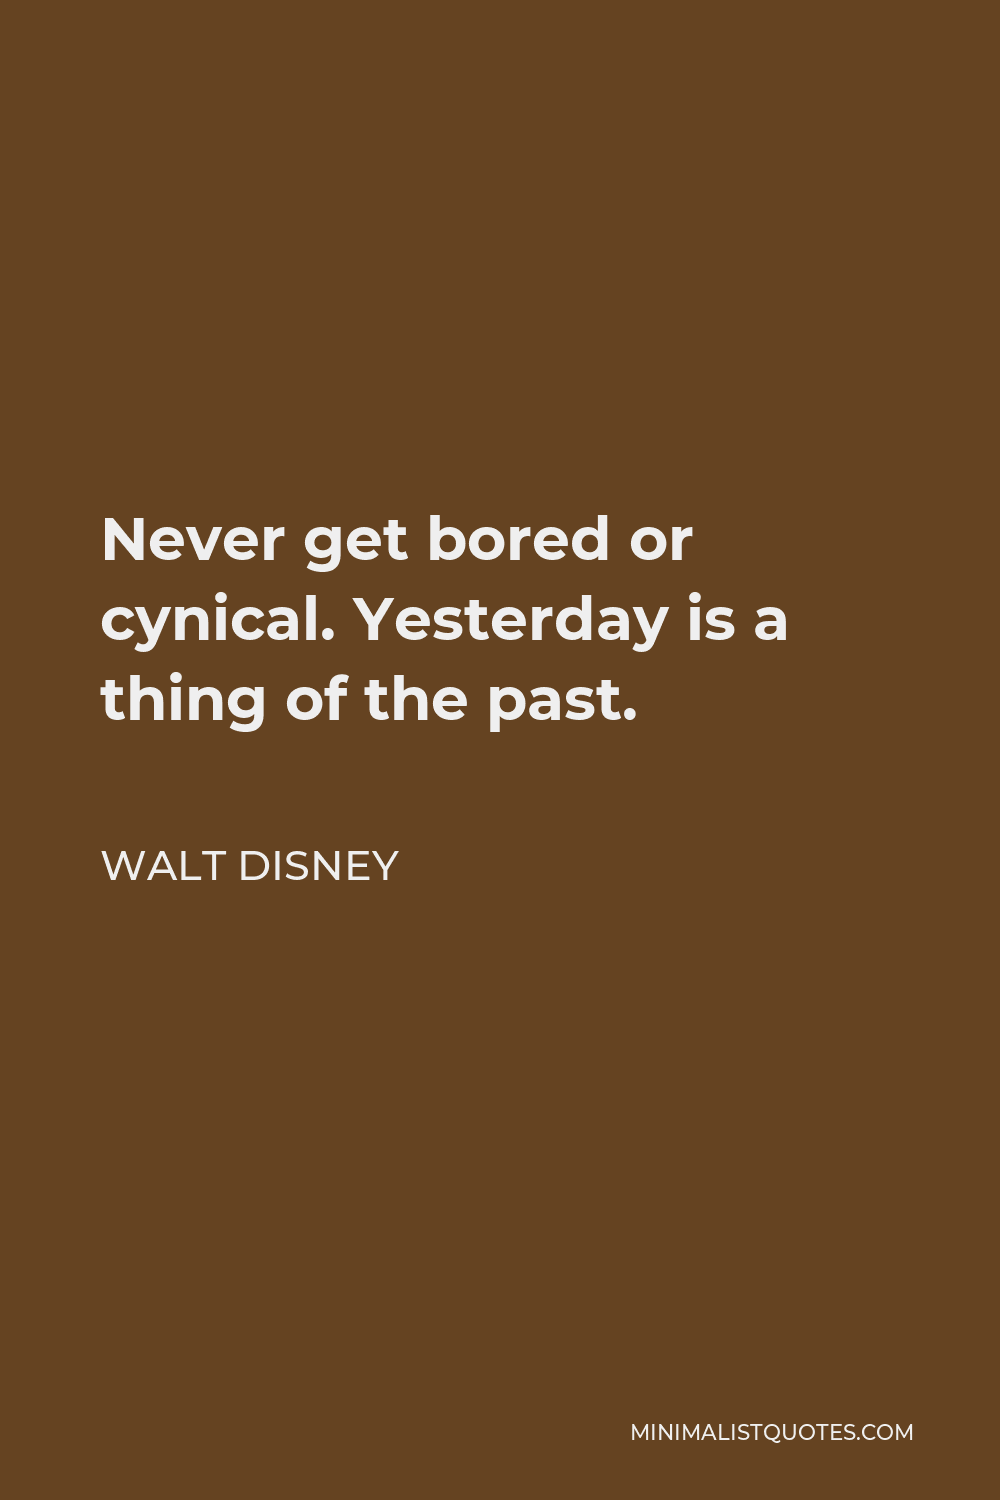 Walt Disney Quote - Never get bored or cynical. Yesterday is a thing of the past.